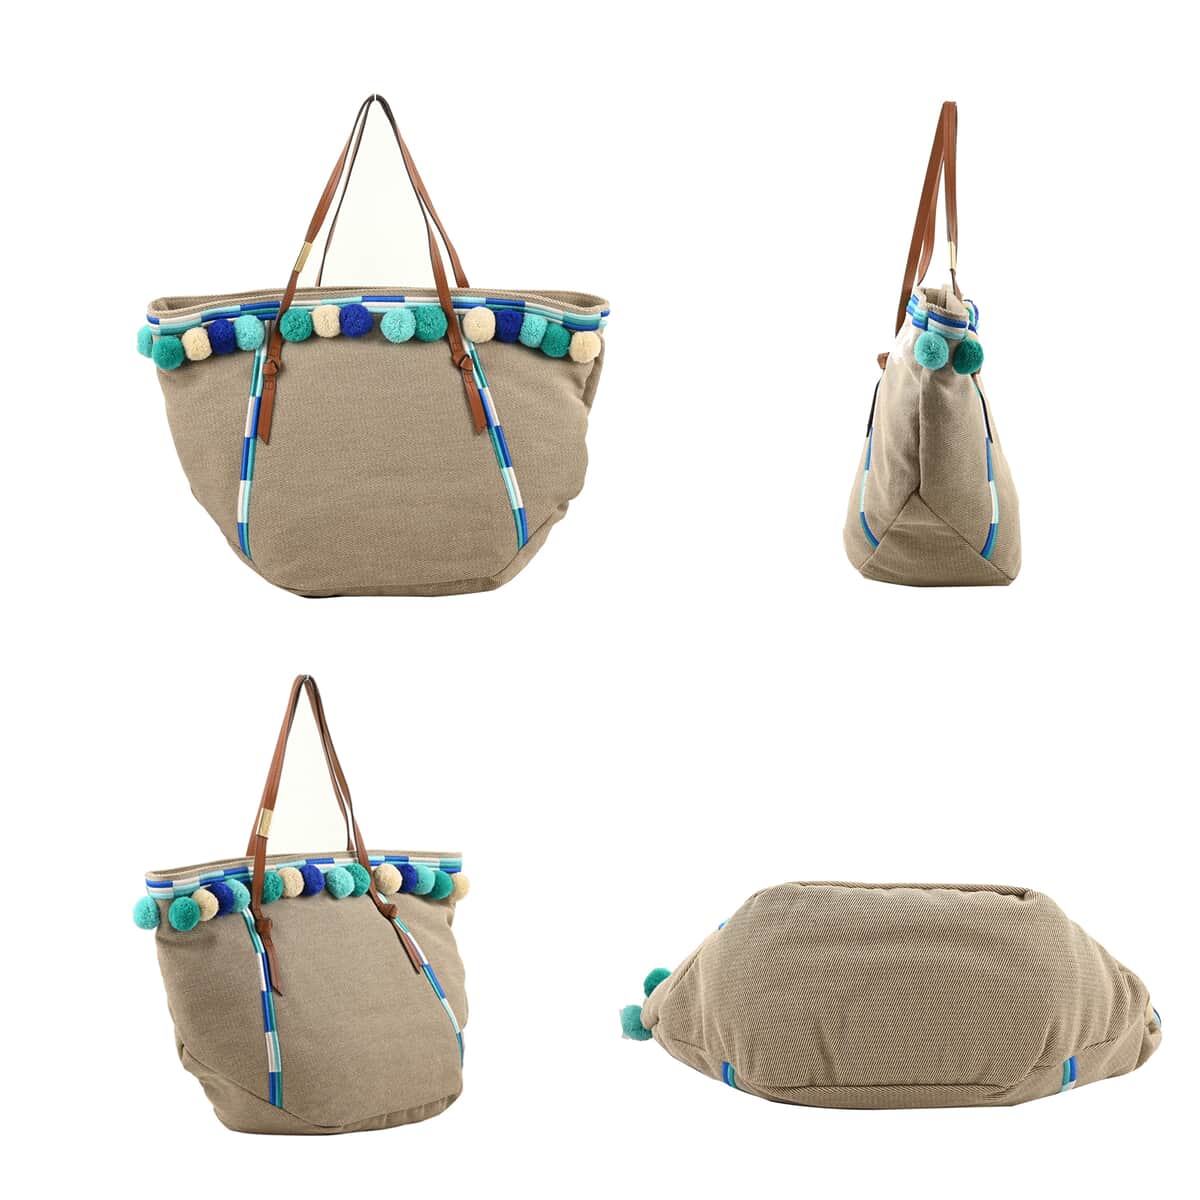 Foley & Corinna Blue Faux Leather Coconut Island Beach Tote Bag (21"x6.5"x13") image number 1